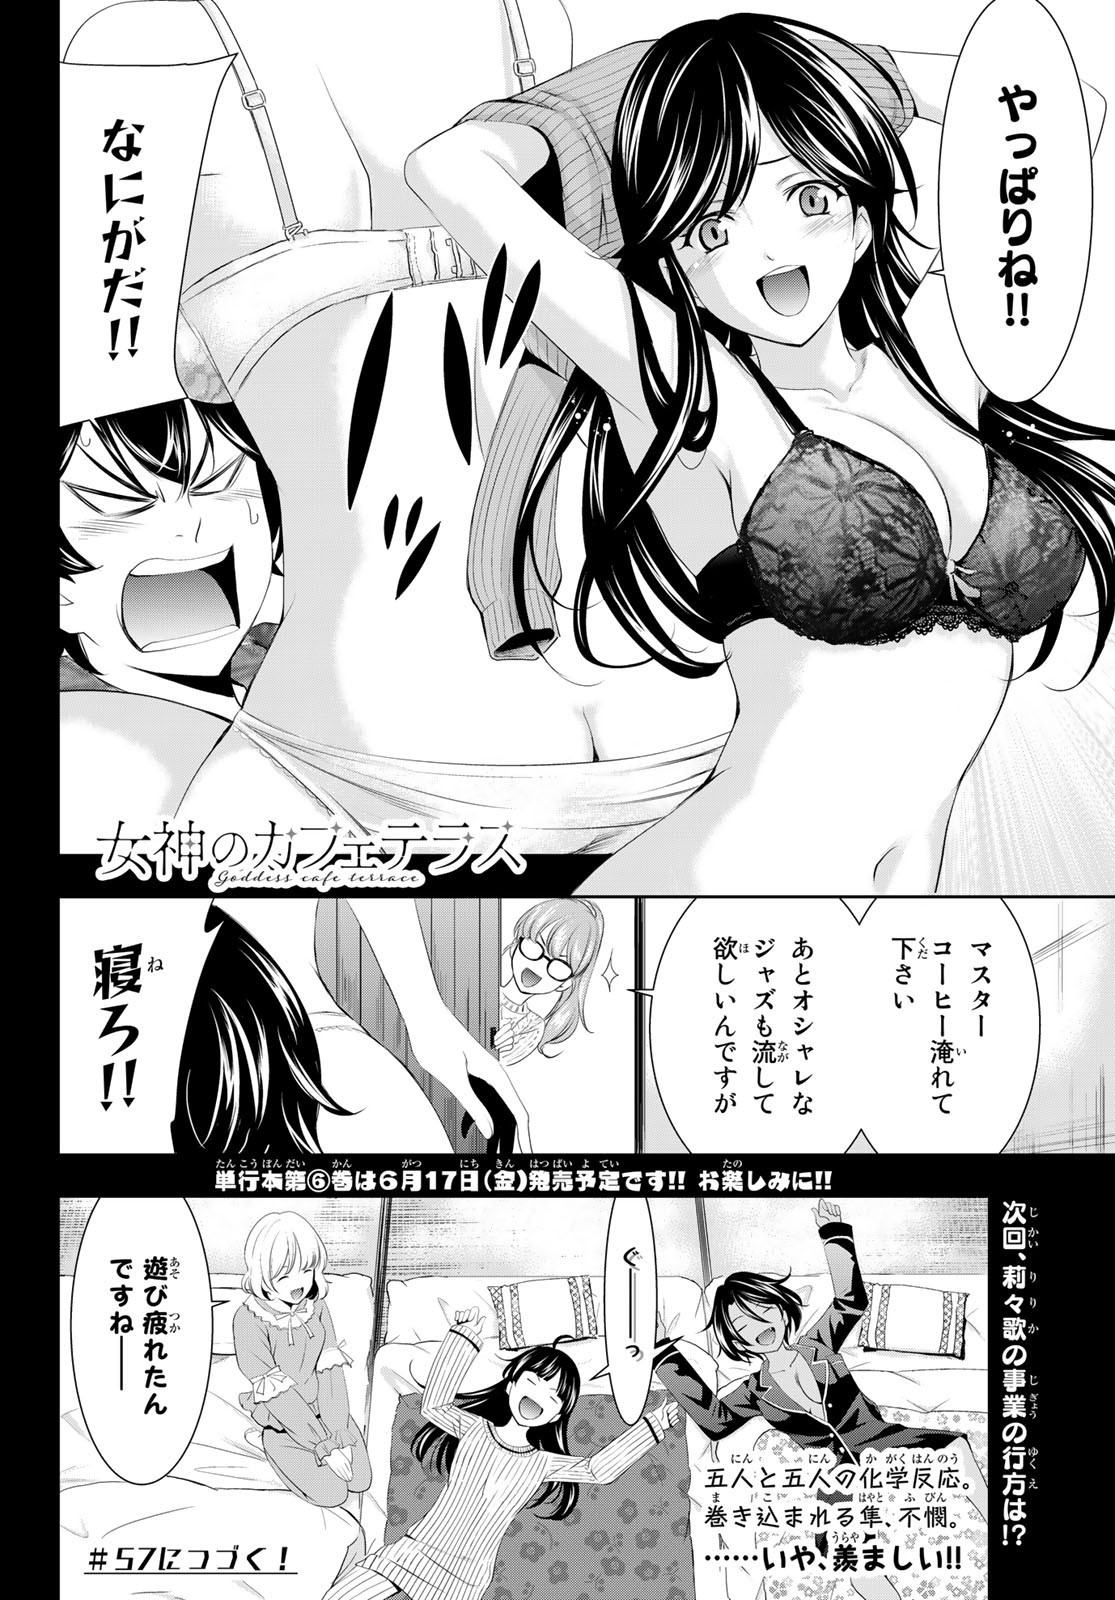 Goddess-Cafe-Terrace - Chapter 056 - Page 18